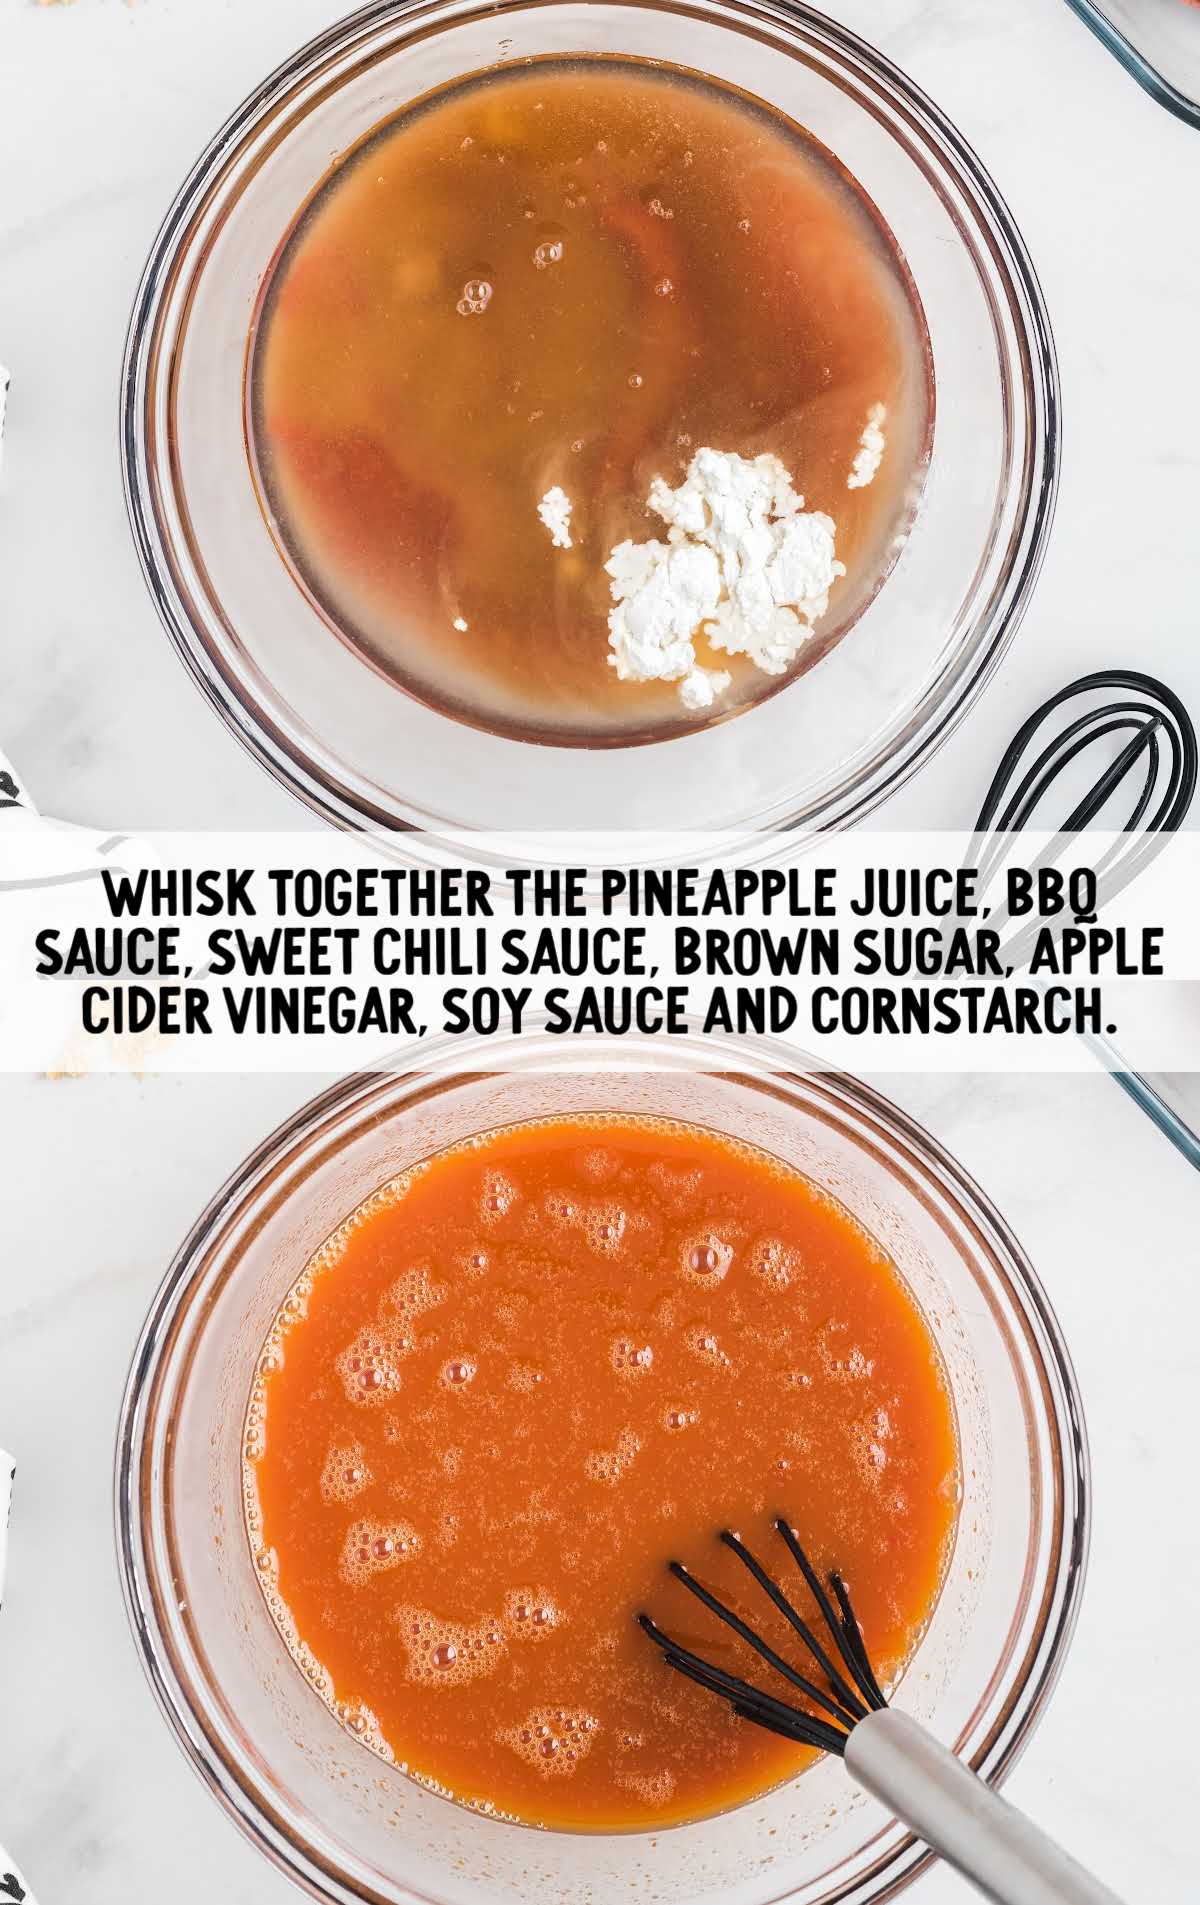 pineapple juice, BBQ sauce, sweet chili sauce, brown sugar, apple cider vinegar, soy sauce, and cornstarch whisked together in a bowl